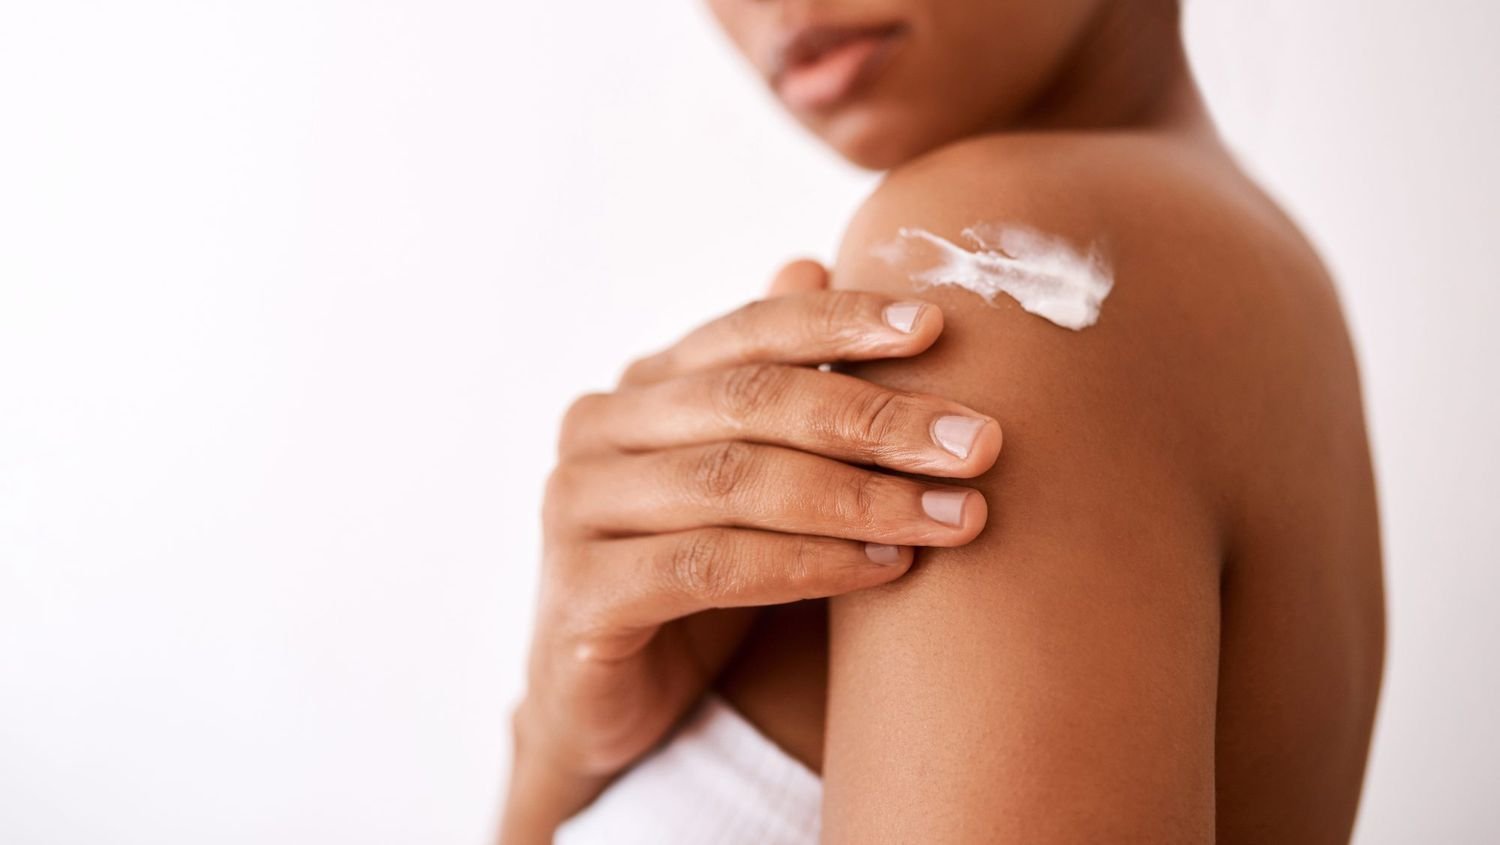 Here's How to Moisturize Dry, Flaky Skin, According to Dermatologists - cover